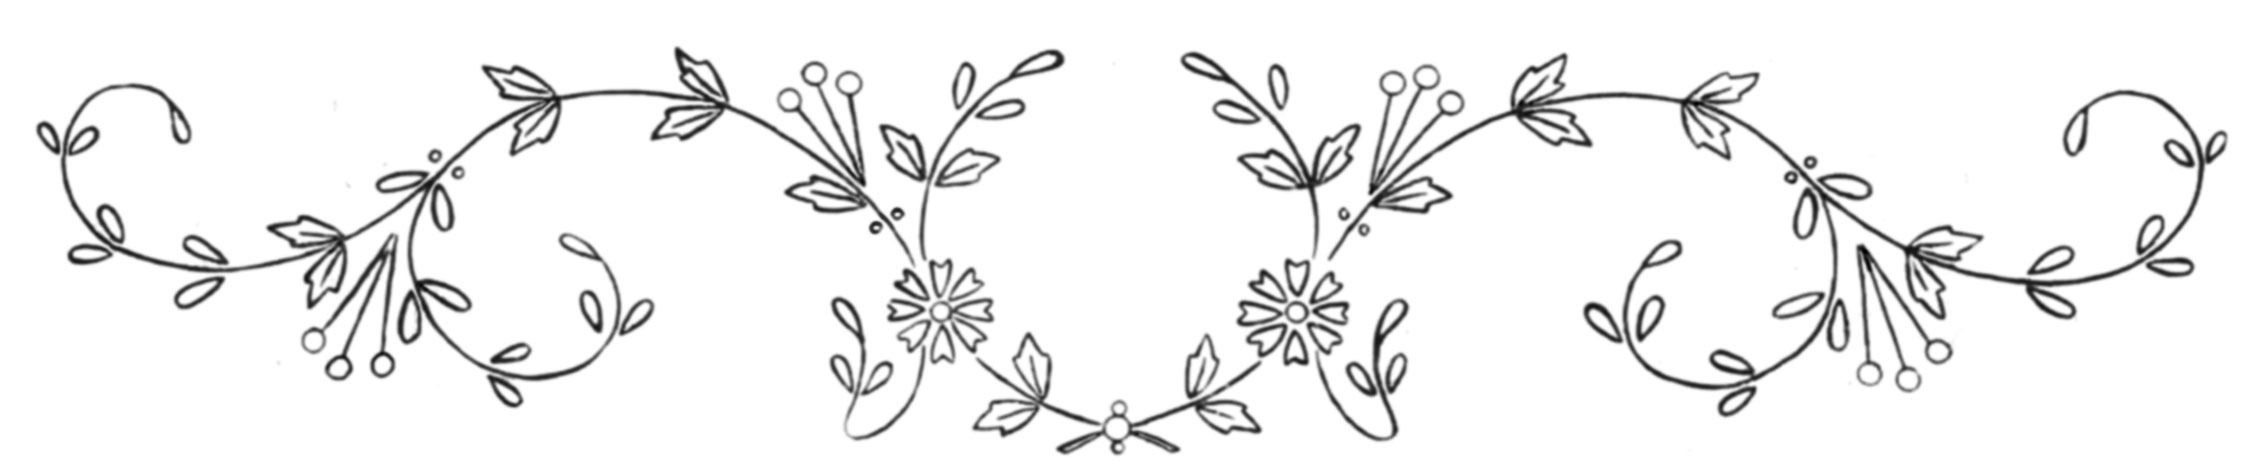 Free Embroidery Patterns Free Pattern Friday Embroidery Designs For Pillowcases Q Is For